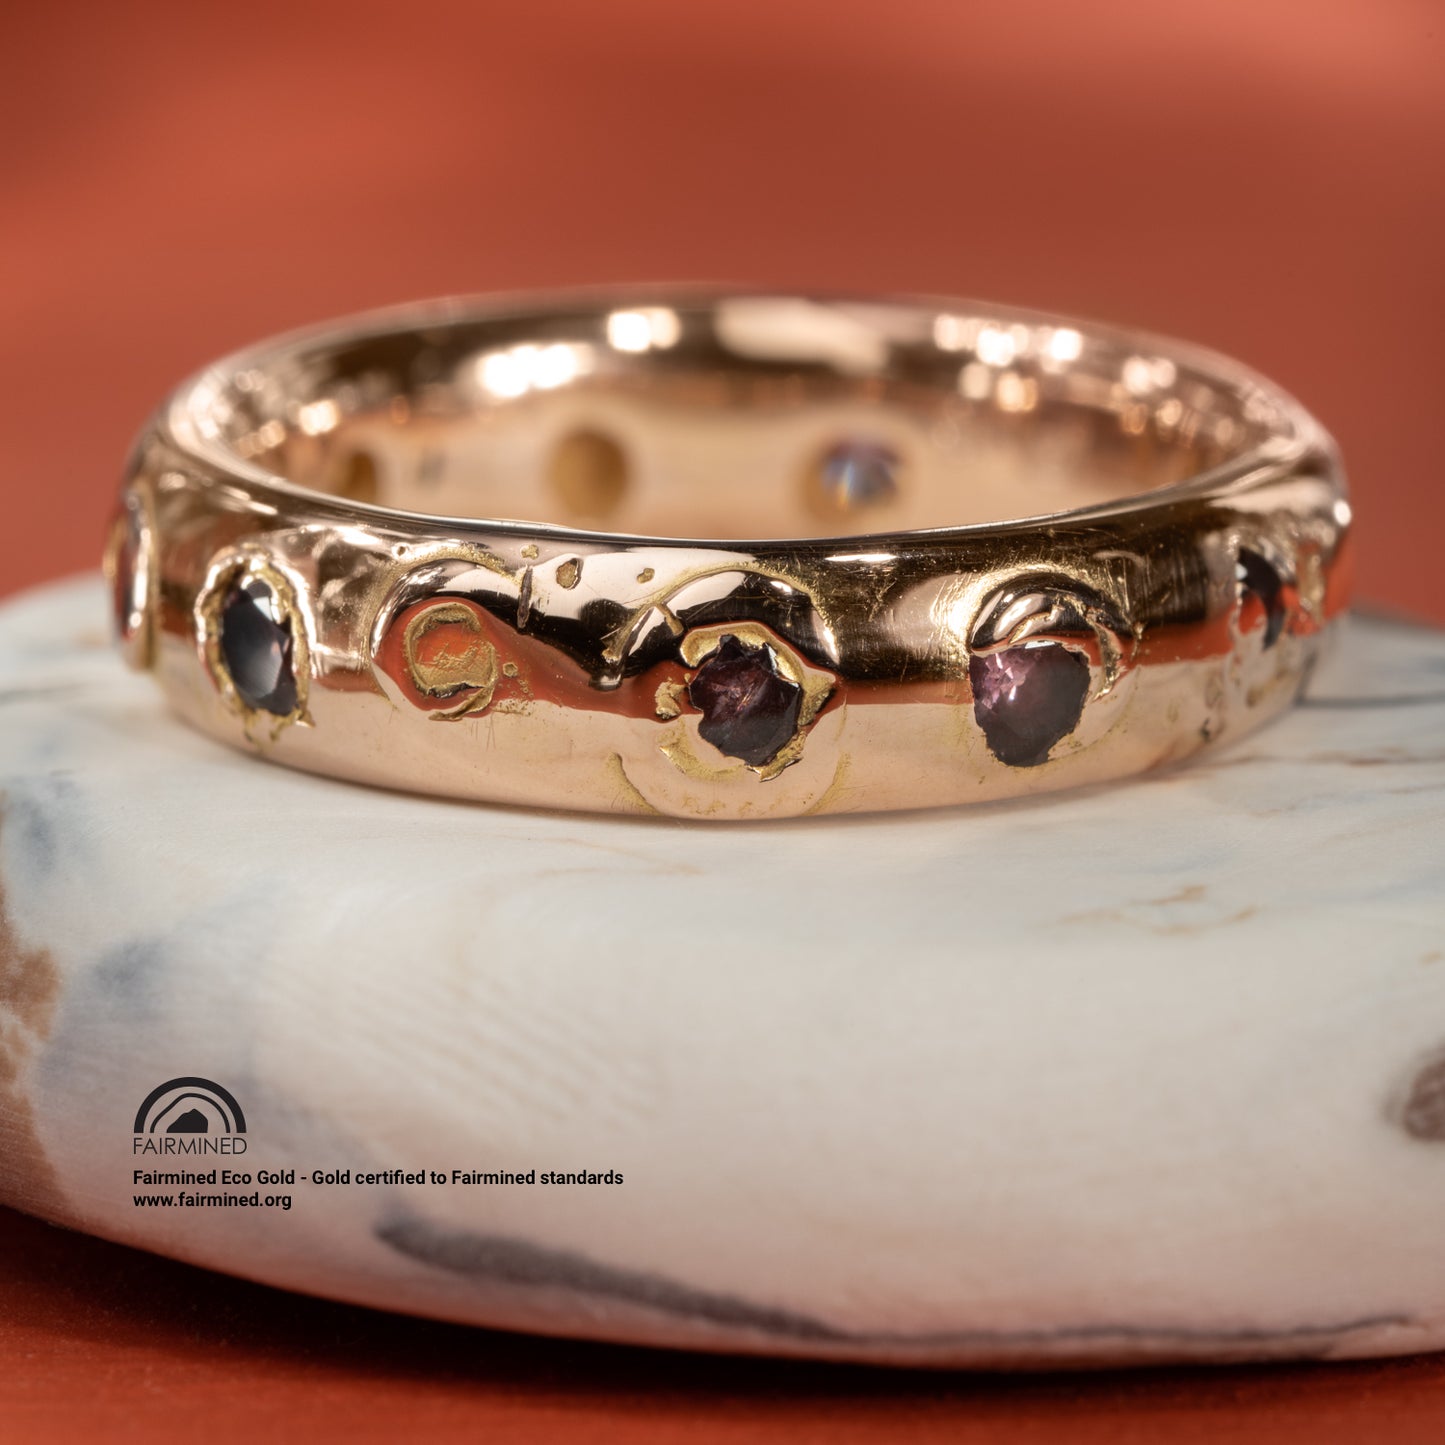 Padparadscha Kimberlite Eternity in Fairmined Eco Rose Gold